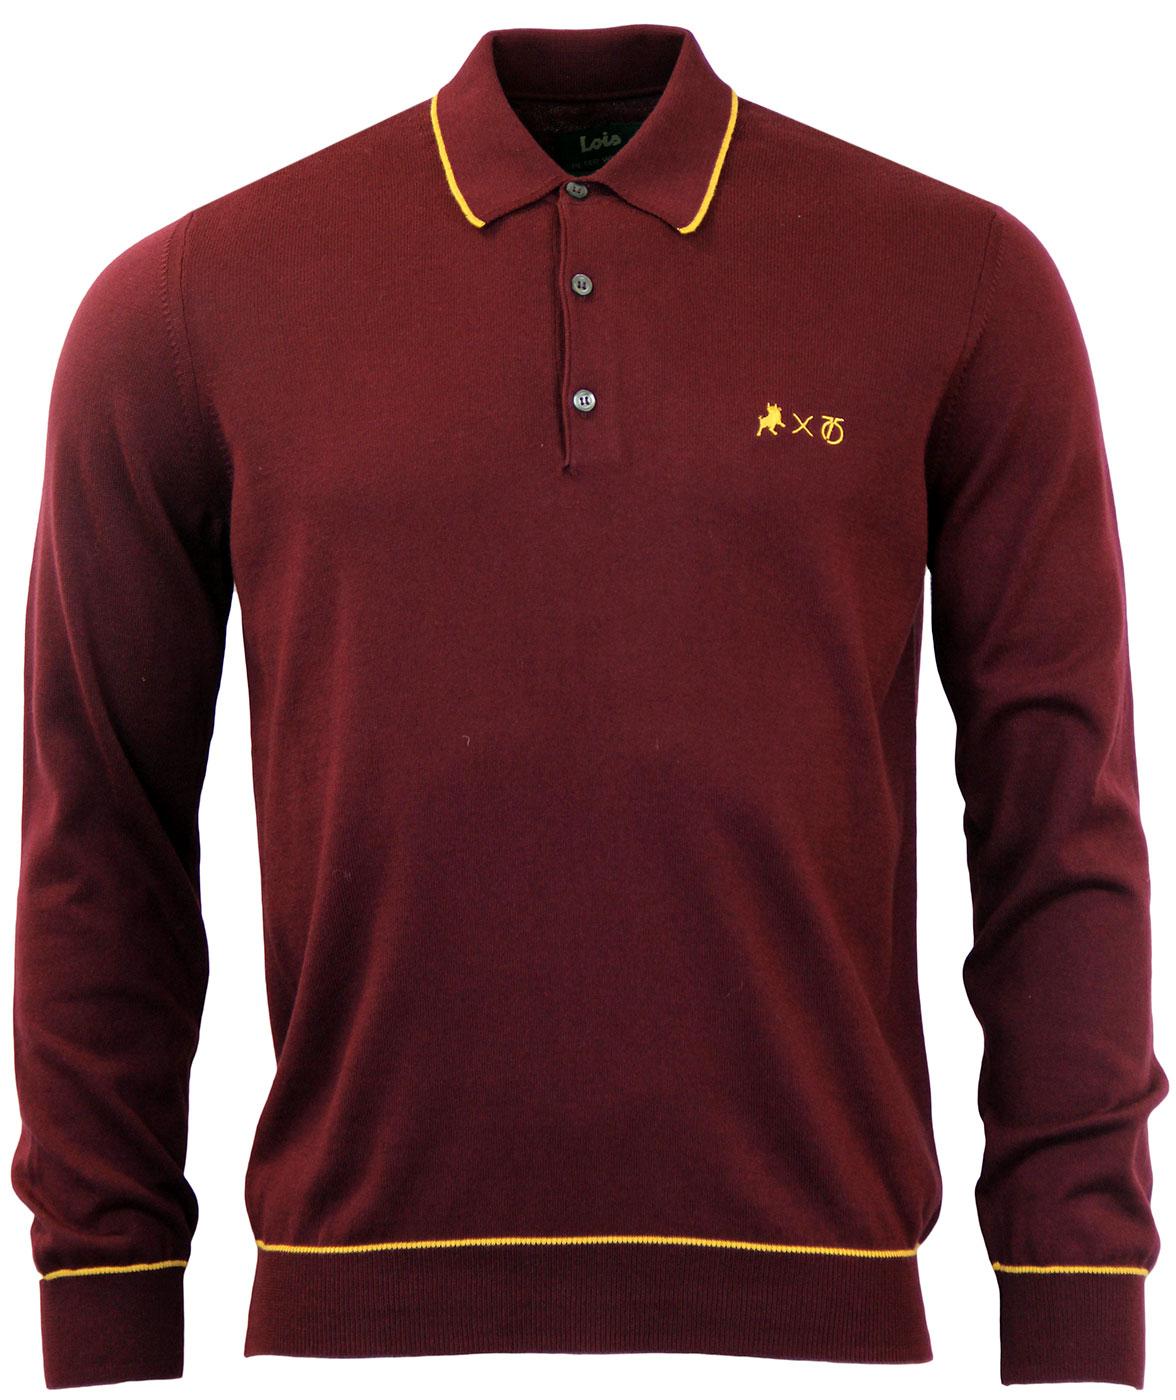 LOIS x PETER WERTH Retro Contrast Tipped Knit Polo